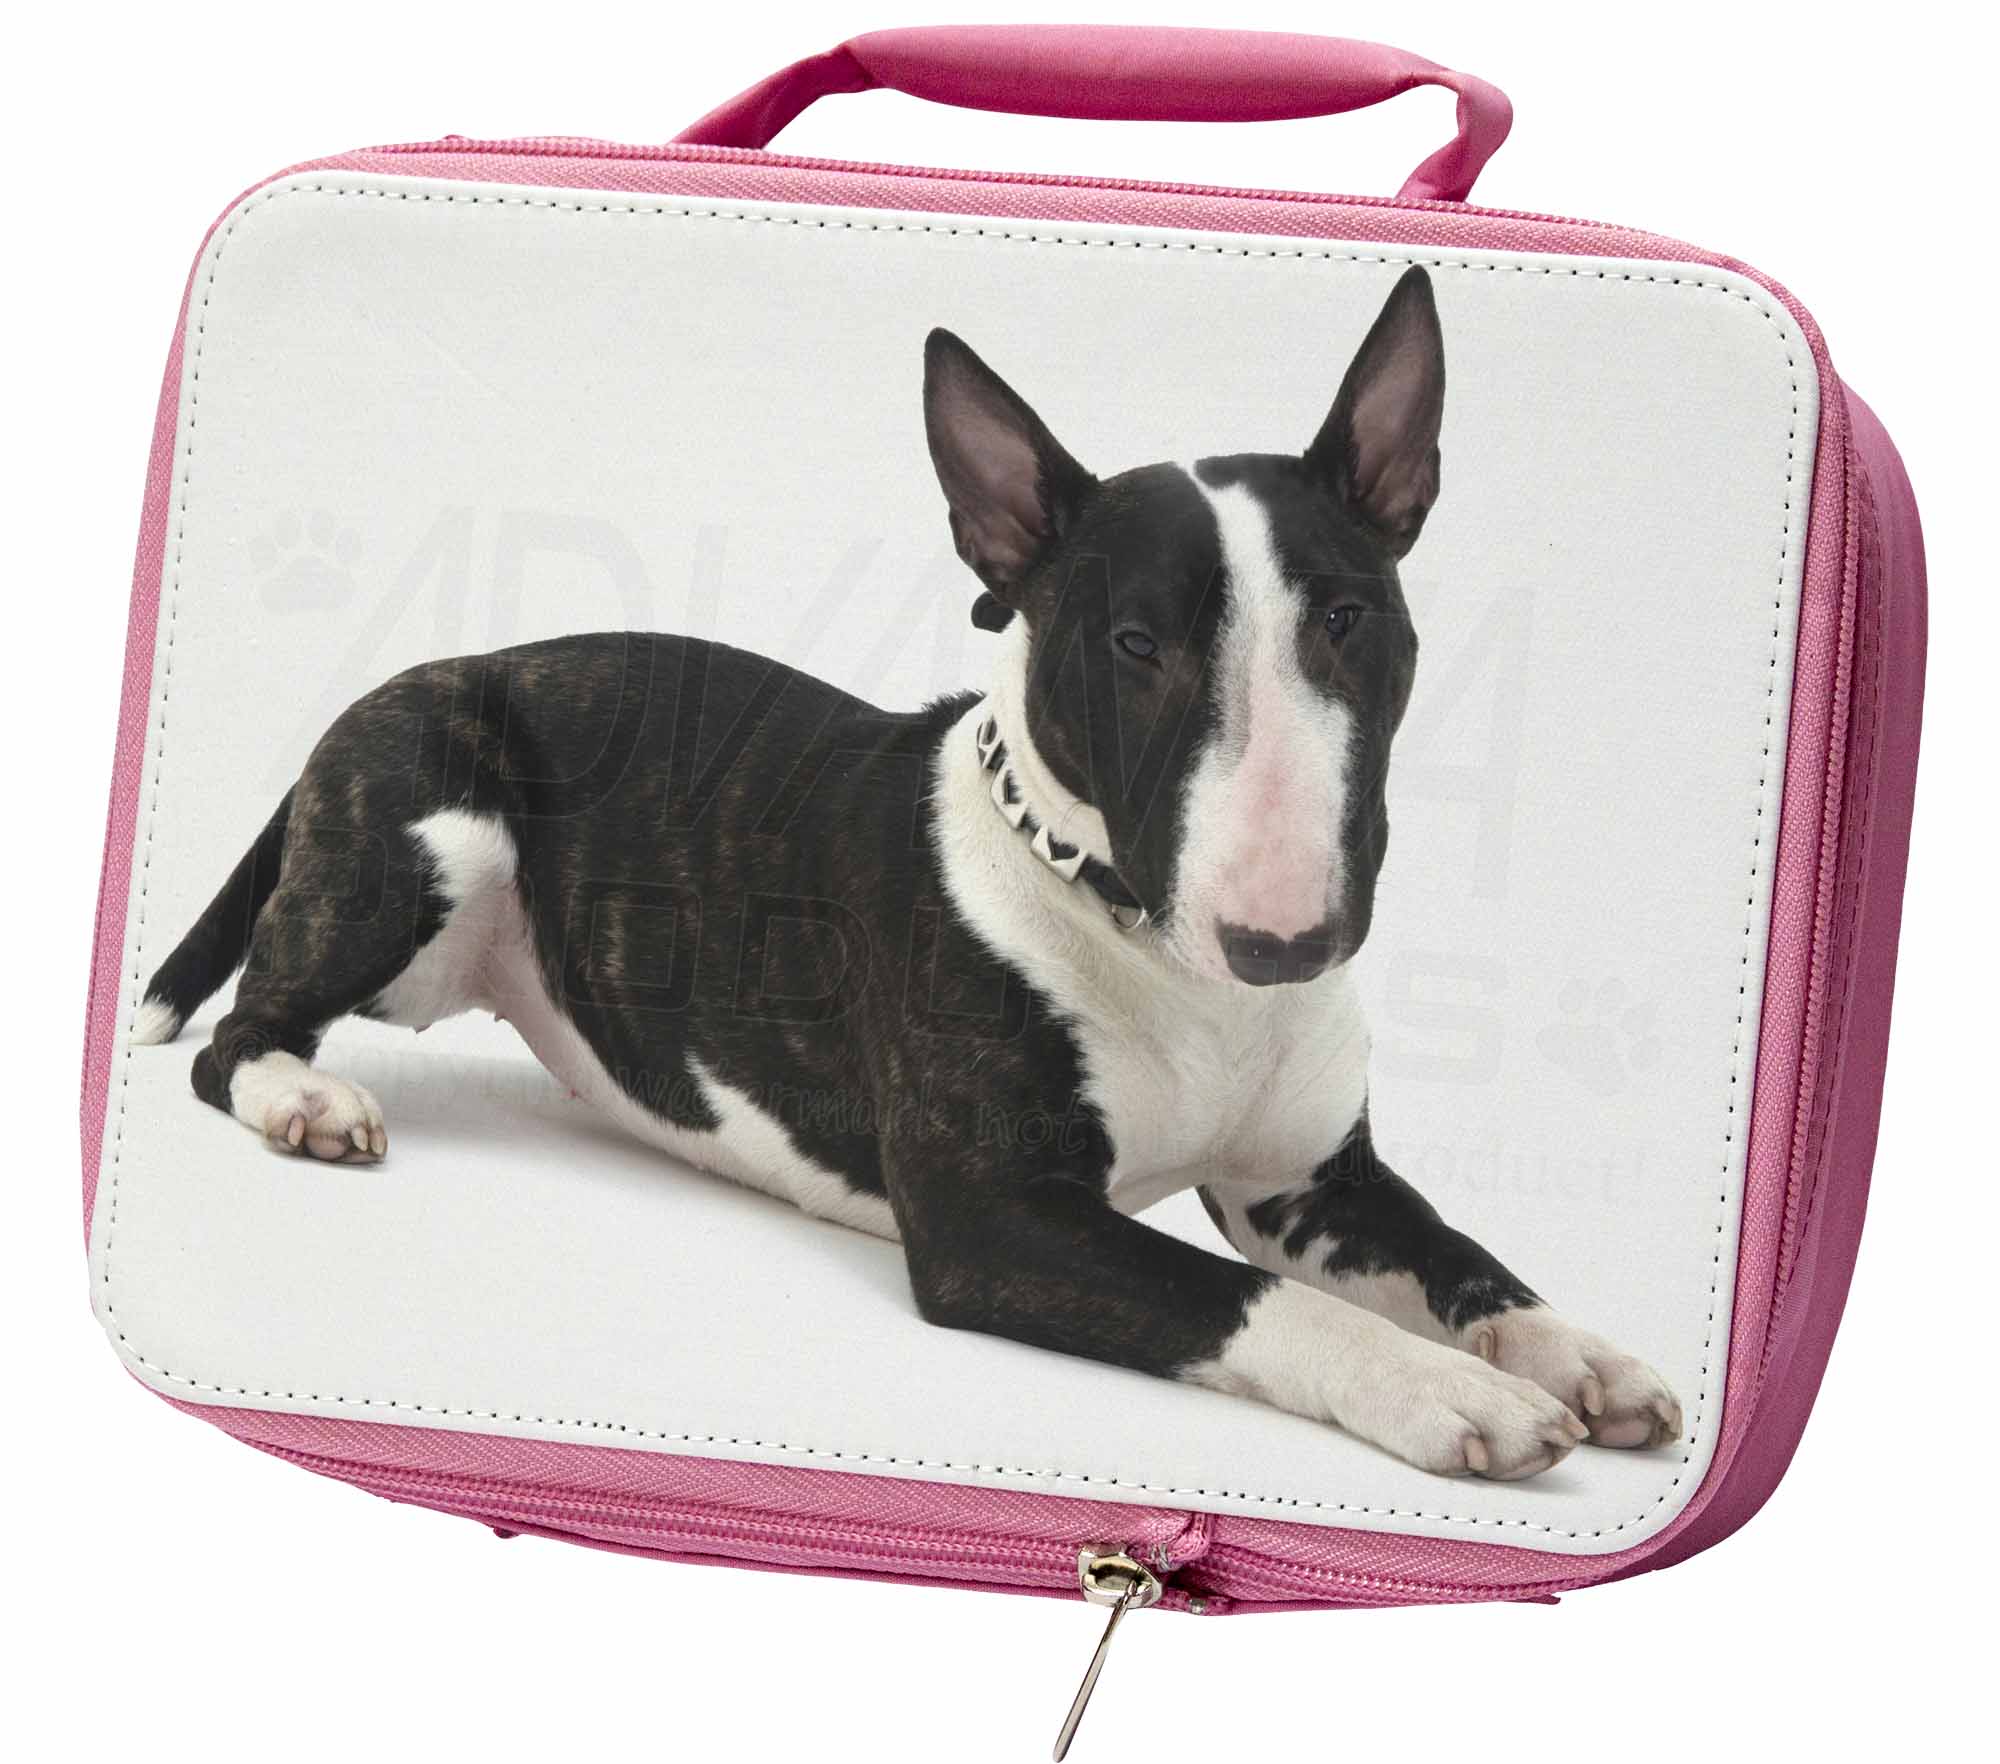 AD-BUT2LBP Bull Terrier Dog Insulated Pink School Lunch Box Bag